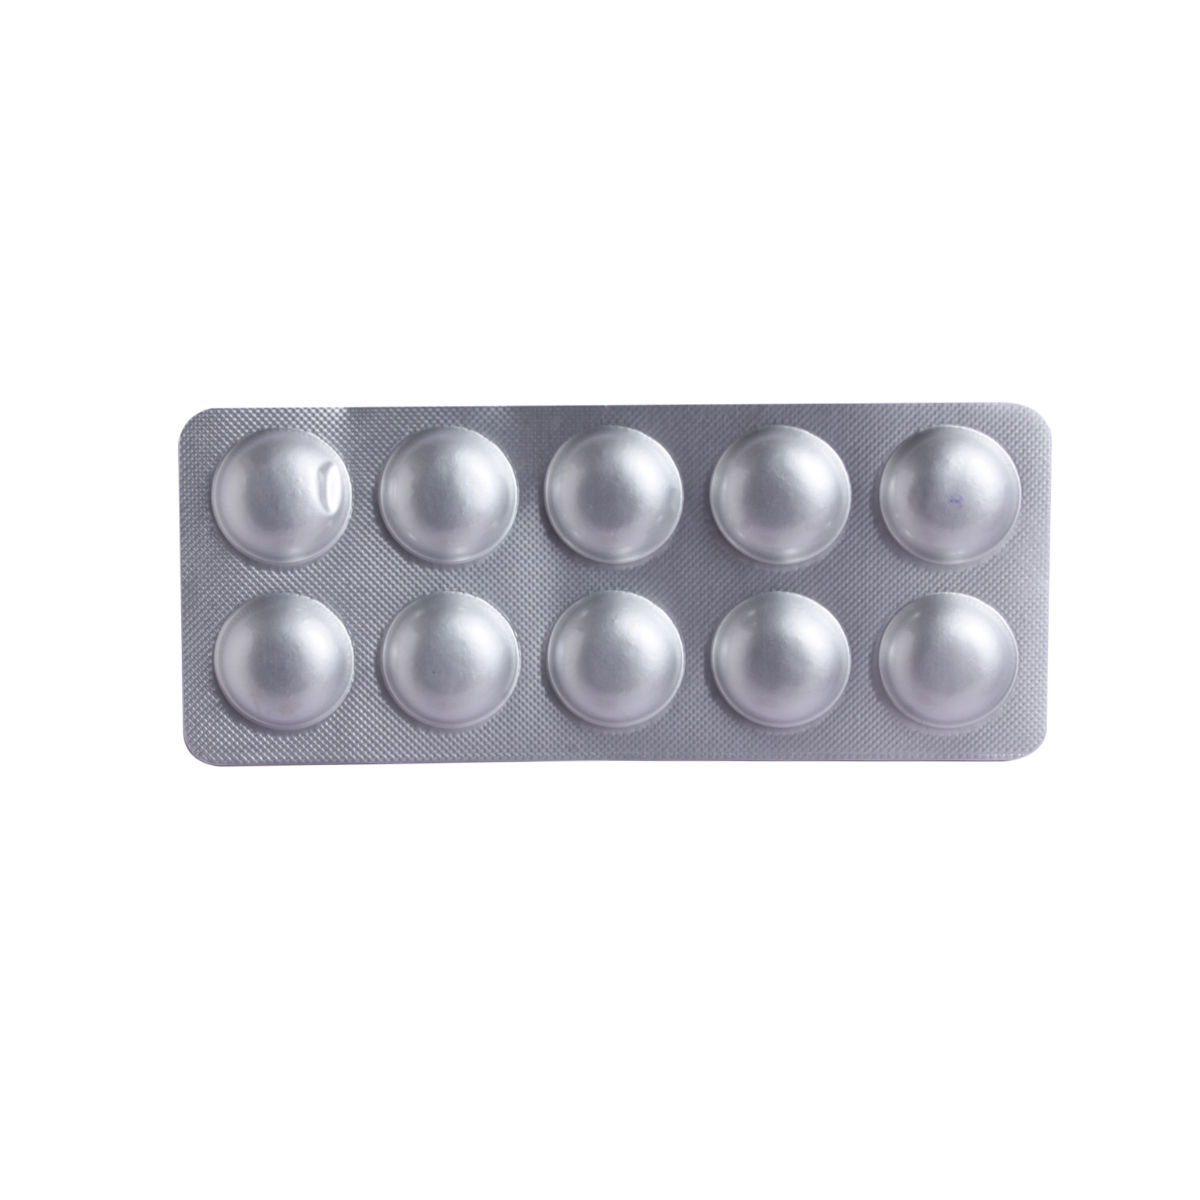 PANBLOC L TABLET 10'S, Pack of 10 TabletS